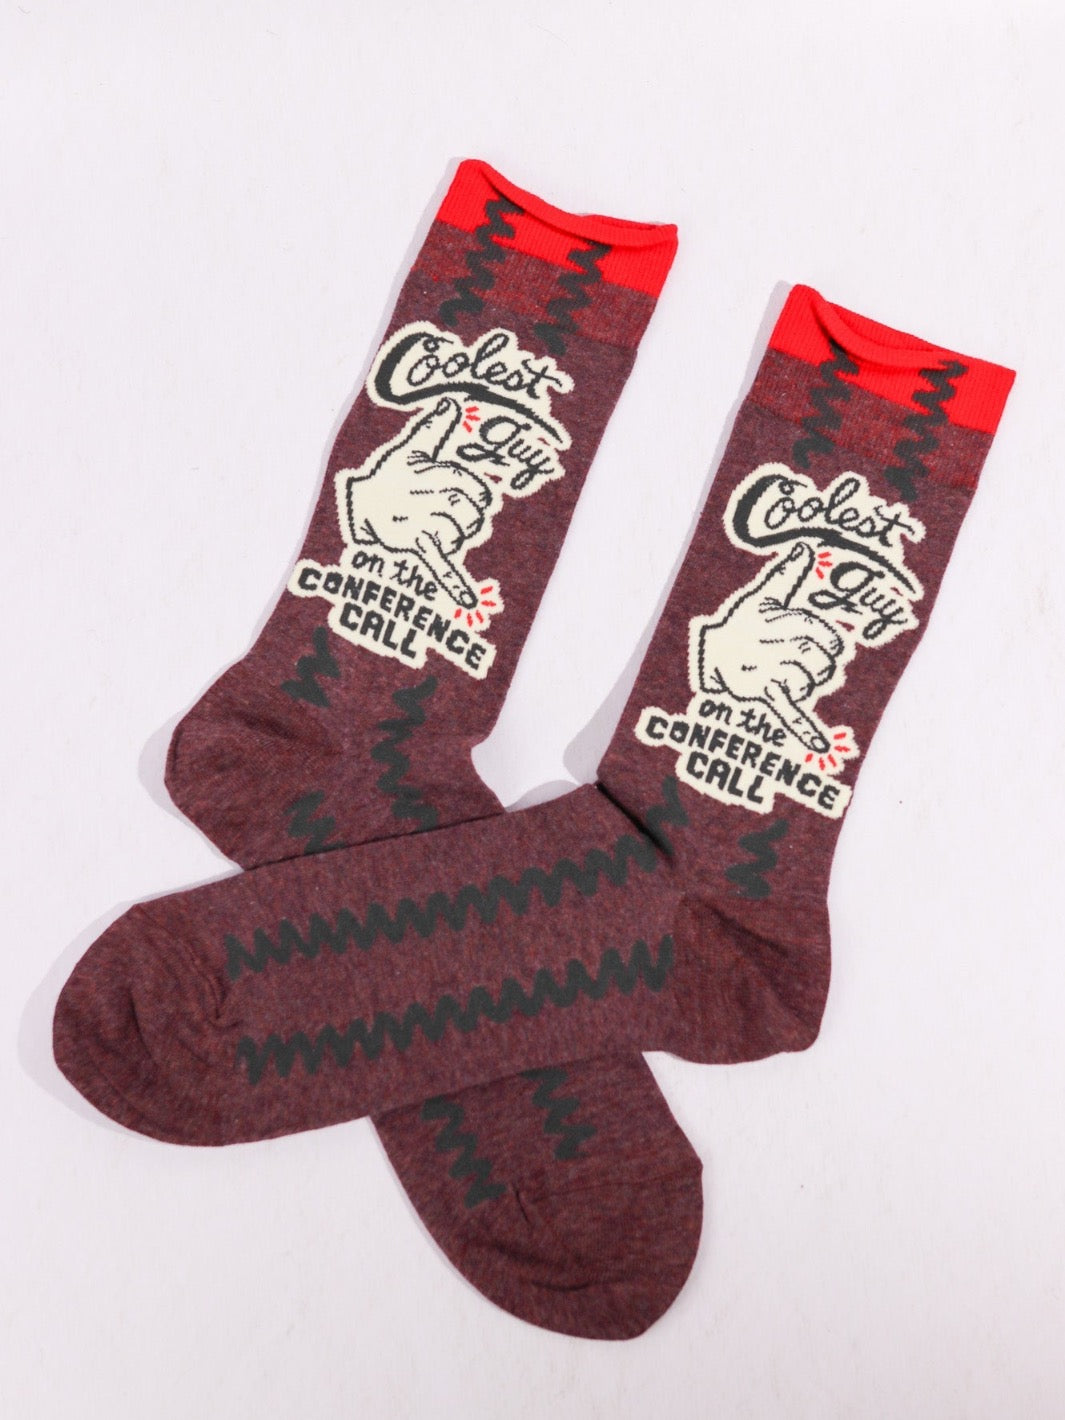 Men's Conference Call Socks - Heyday